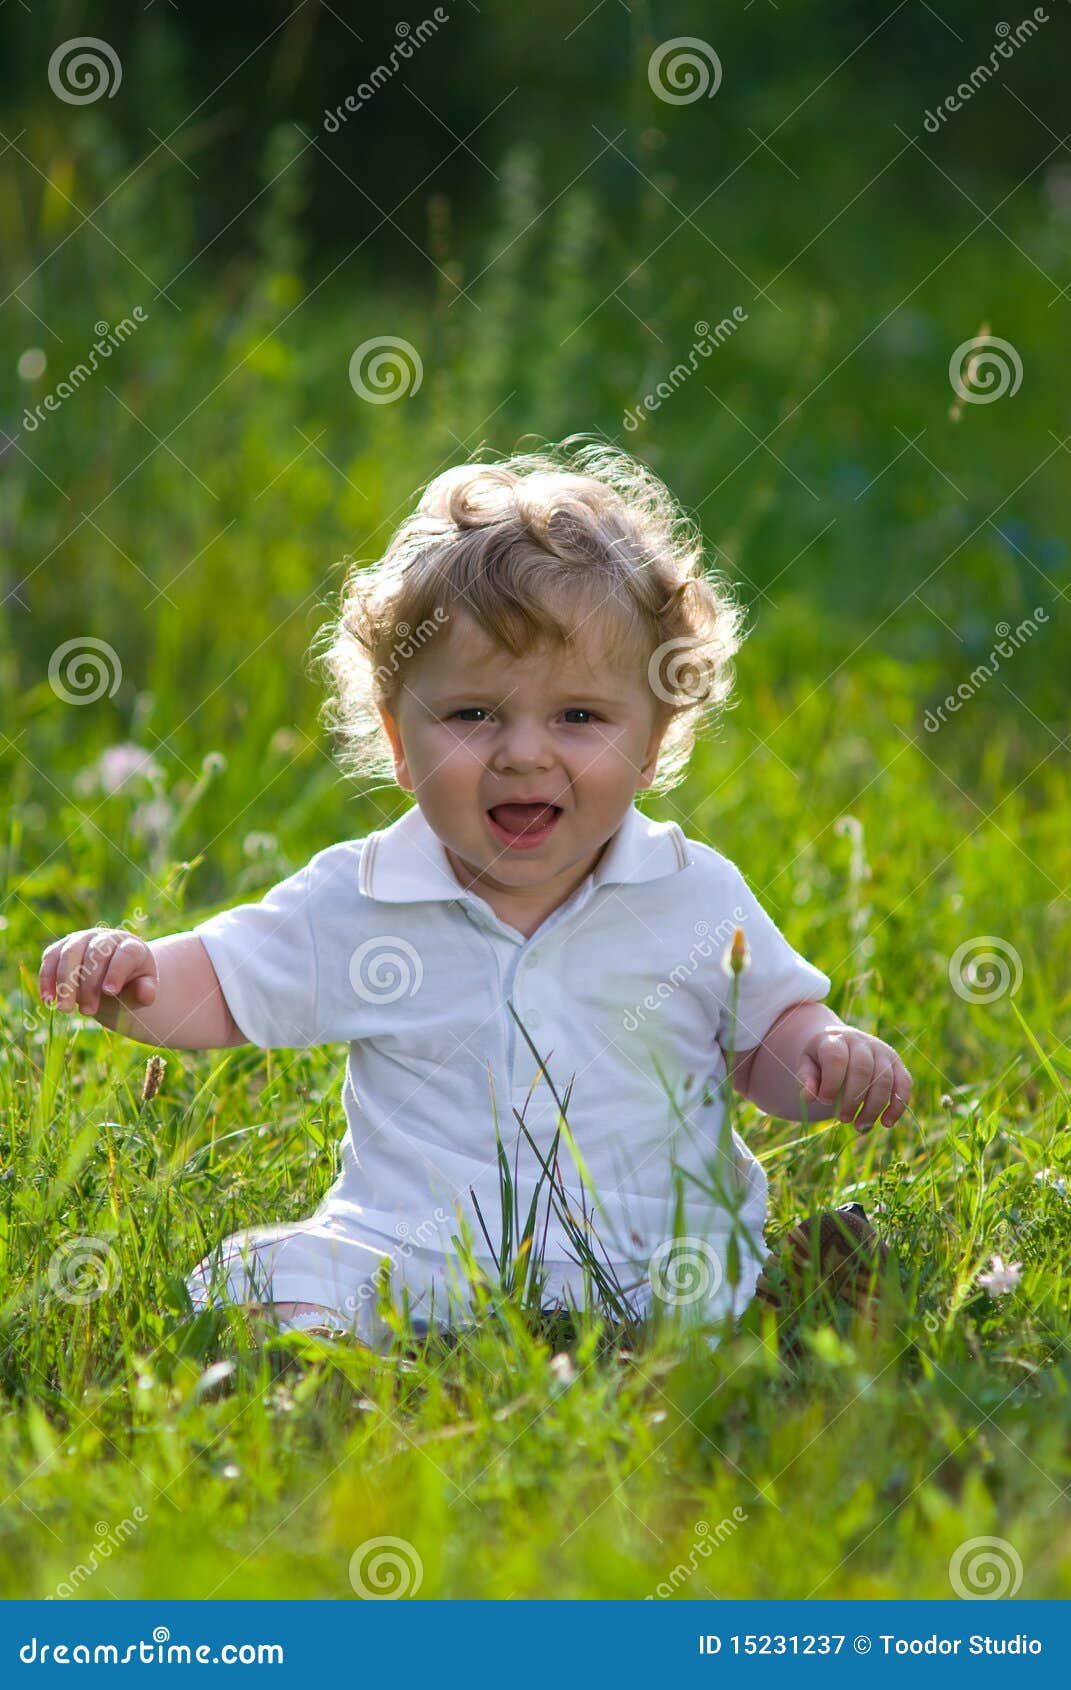 little baby in the midle of green nature